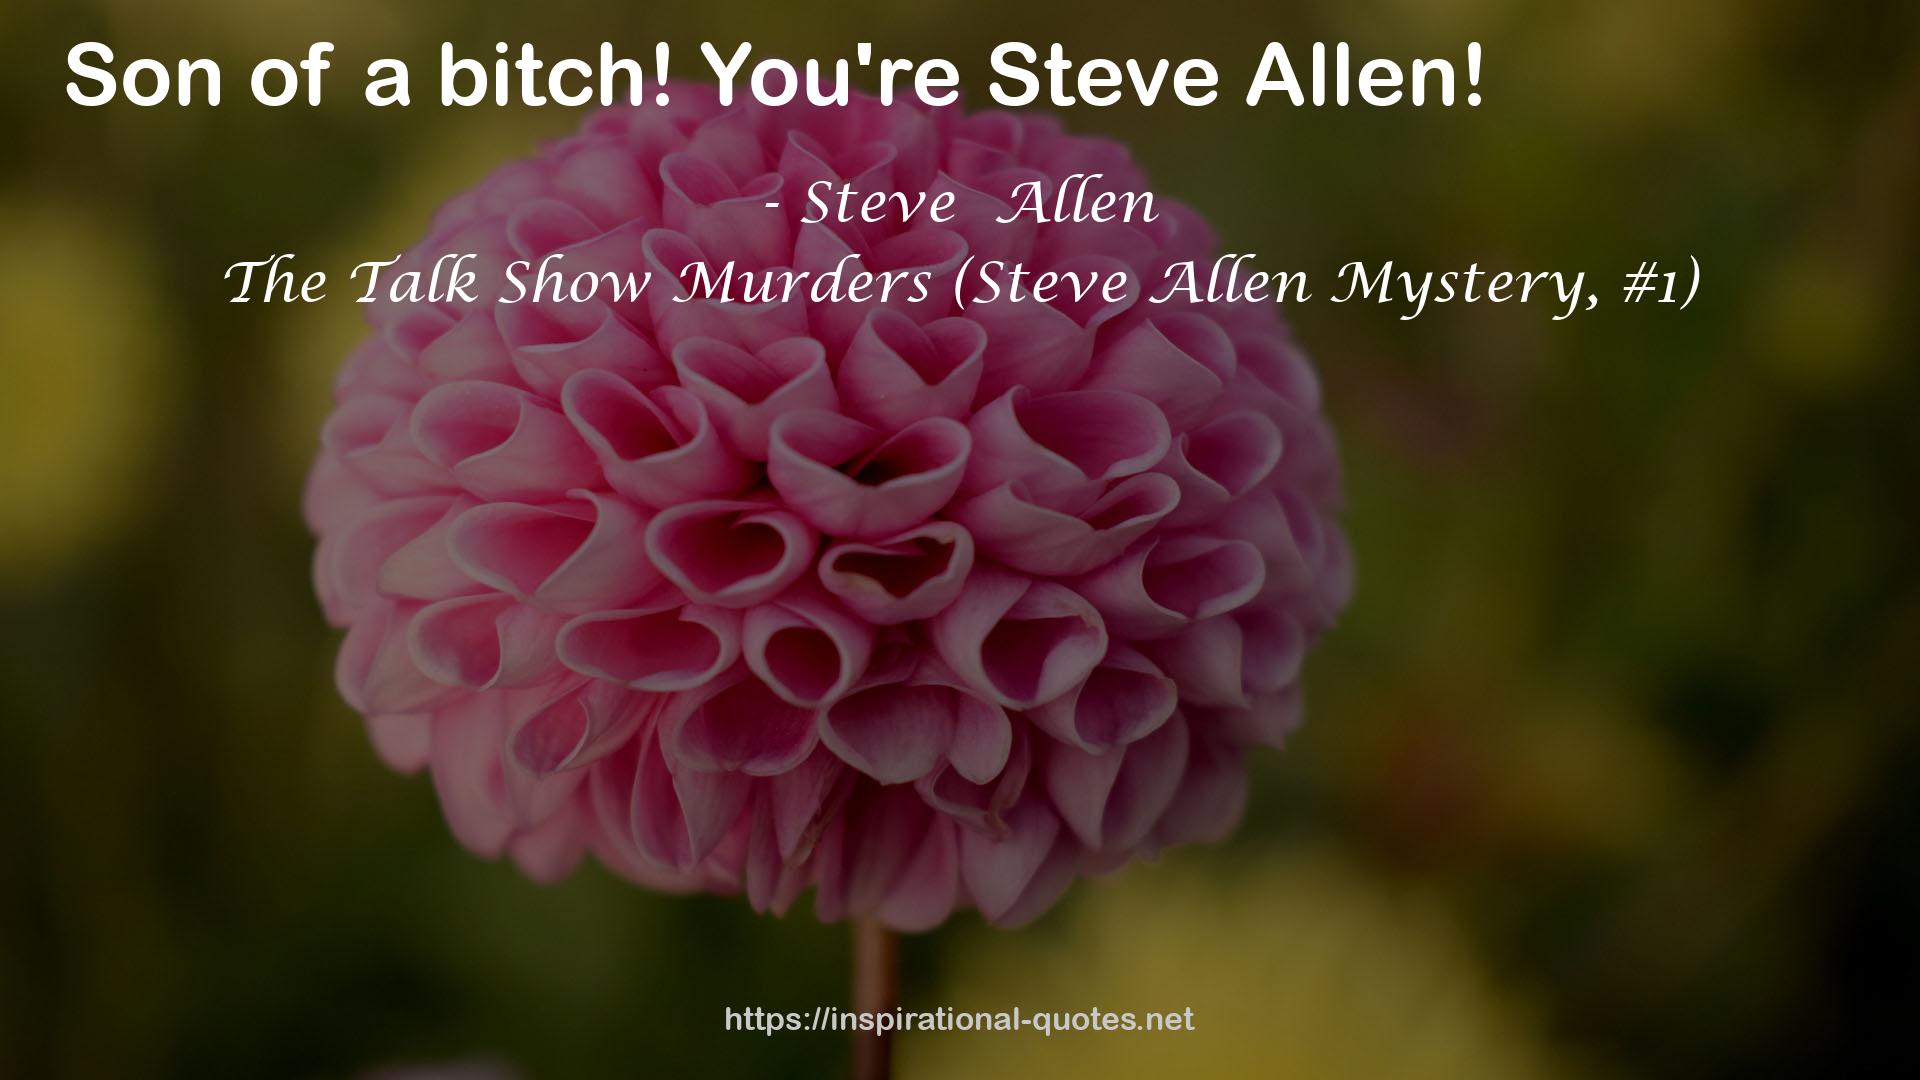 The Talk Show Murders (Steve Allen Mystery, #1) QUOTES